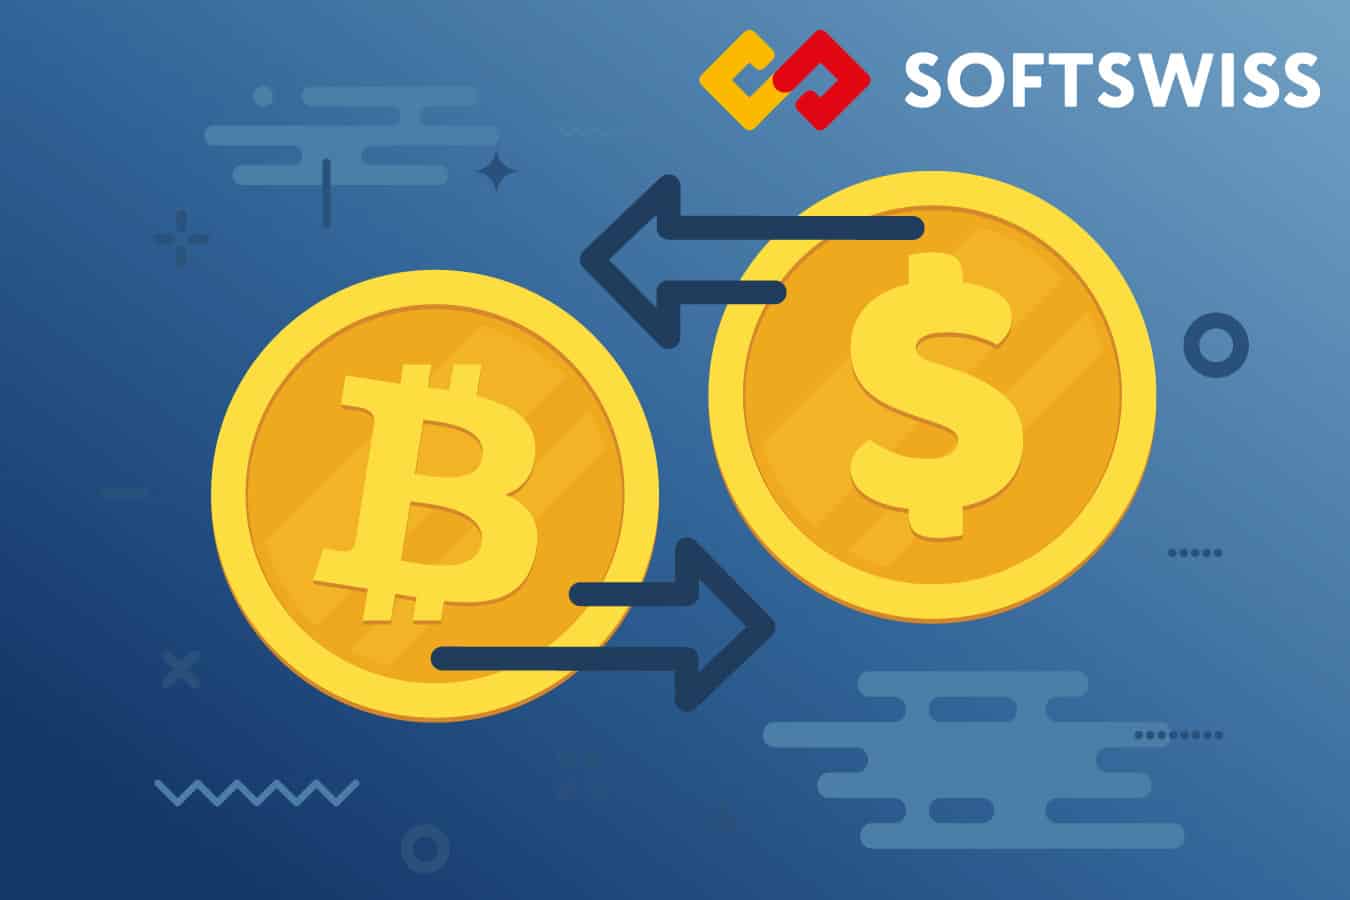 SOFTSWISS to Introduce Exchange Feature for Crypto Gamblers